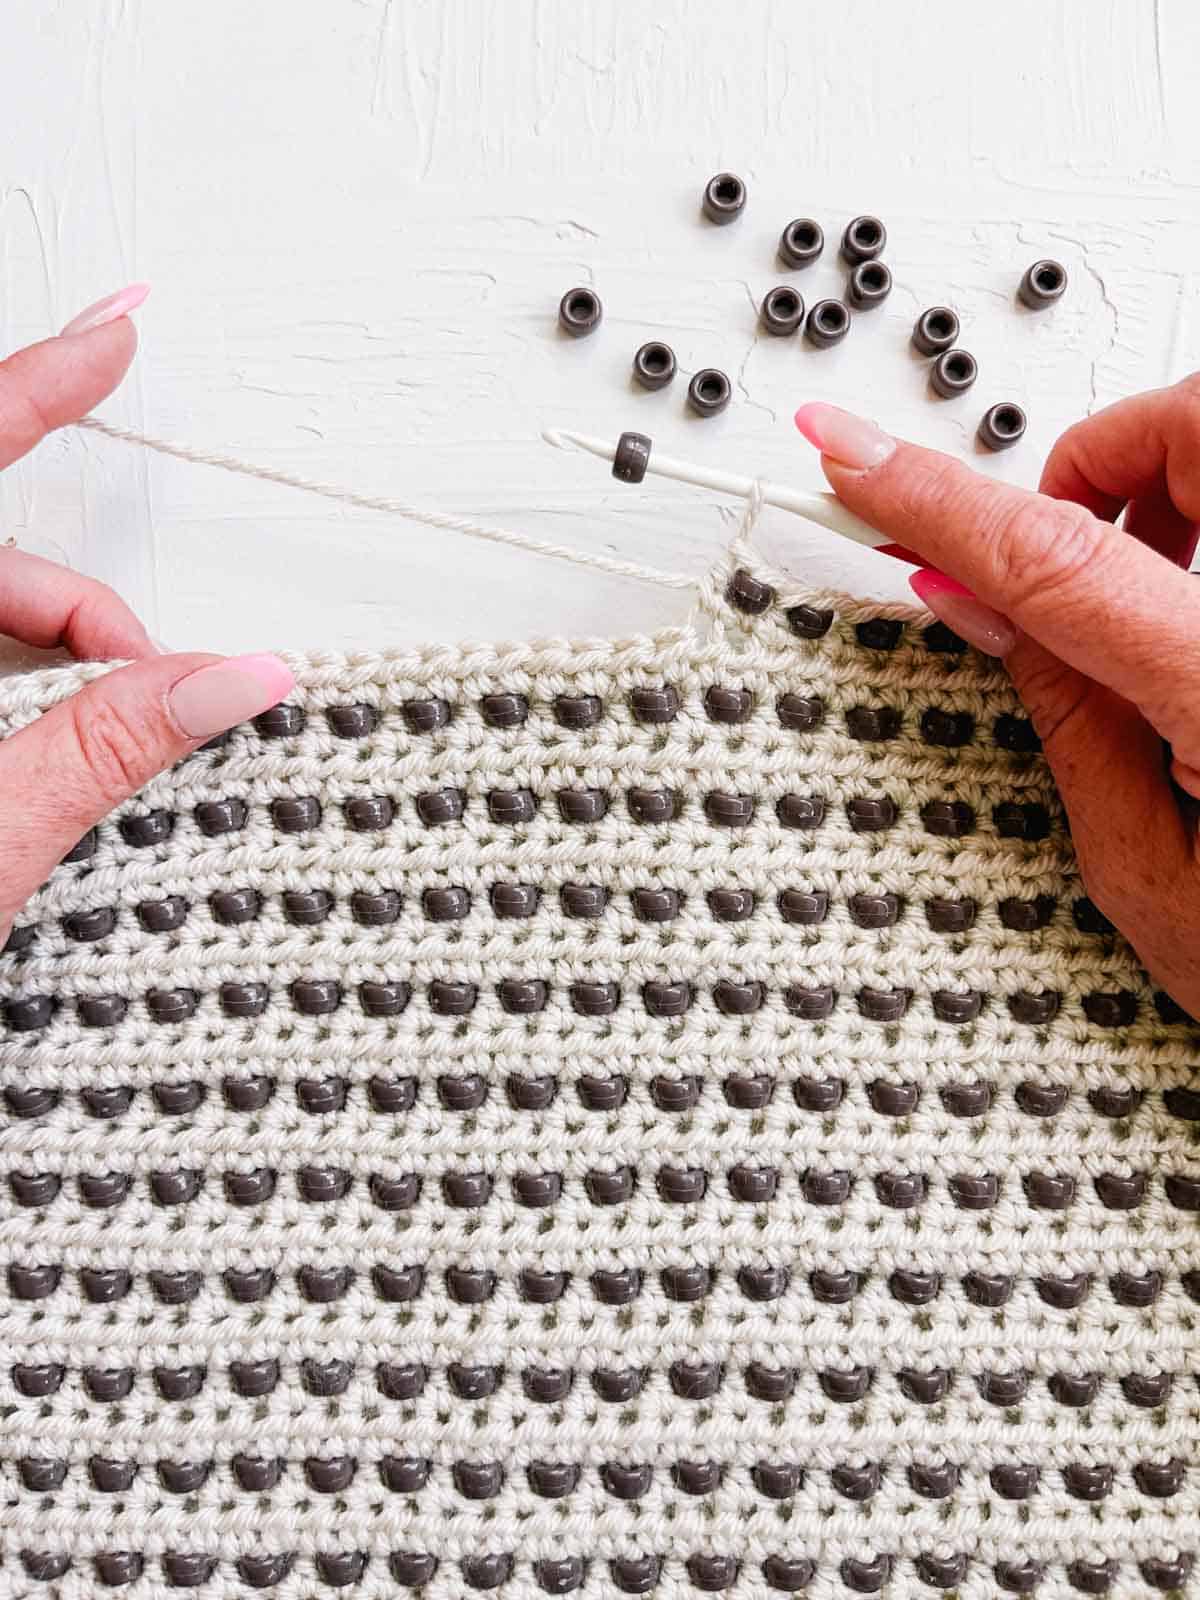 A crocheted blanket with brown pony beads being added to the stitches.